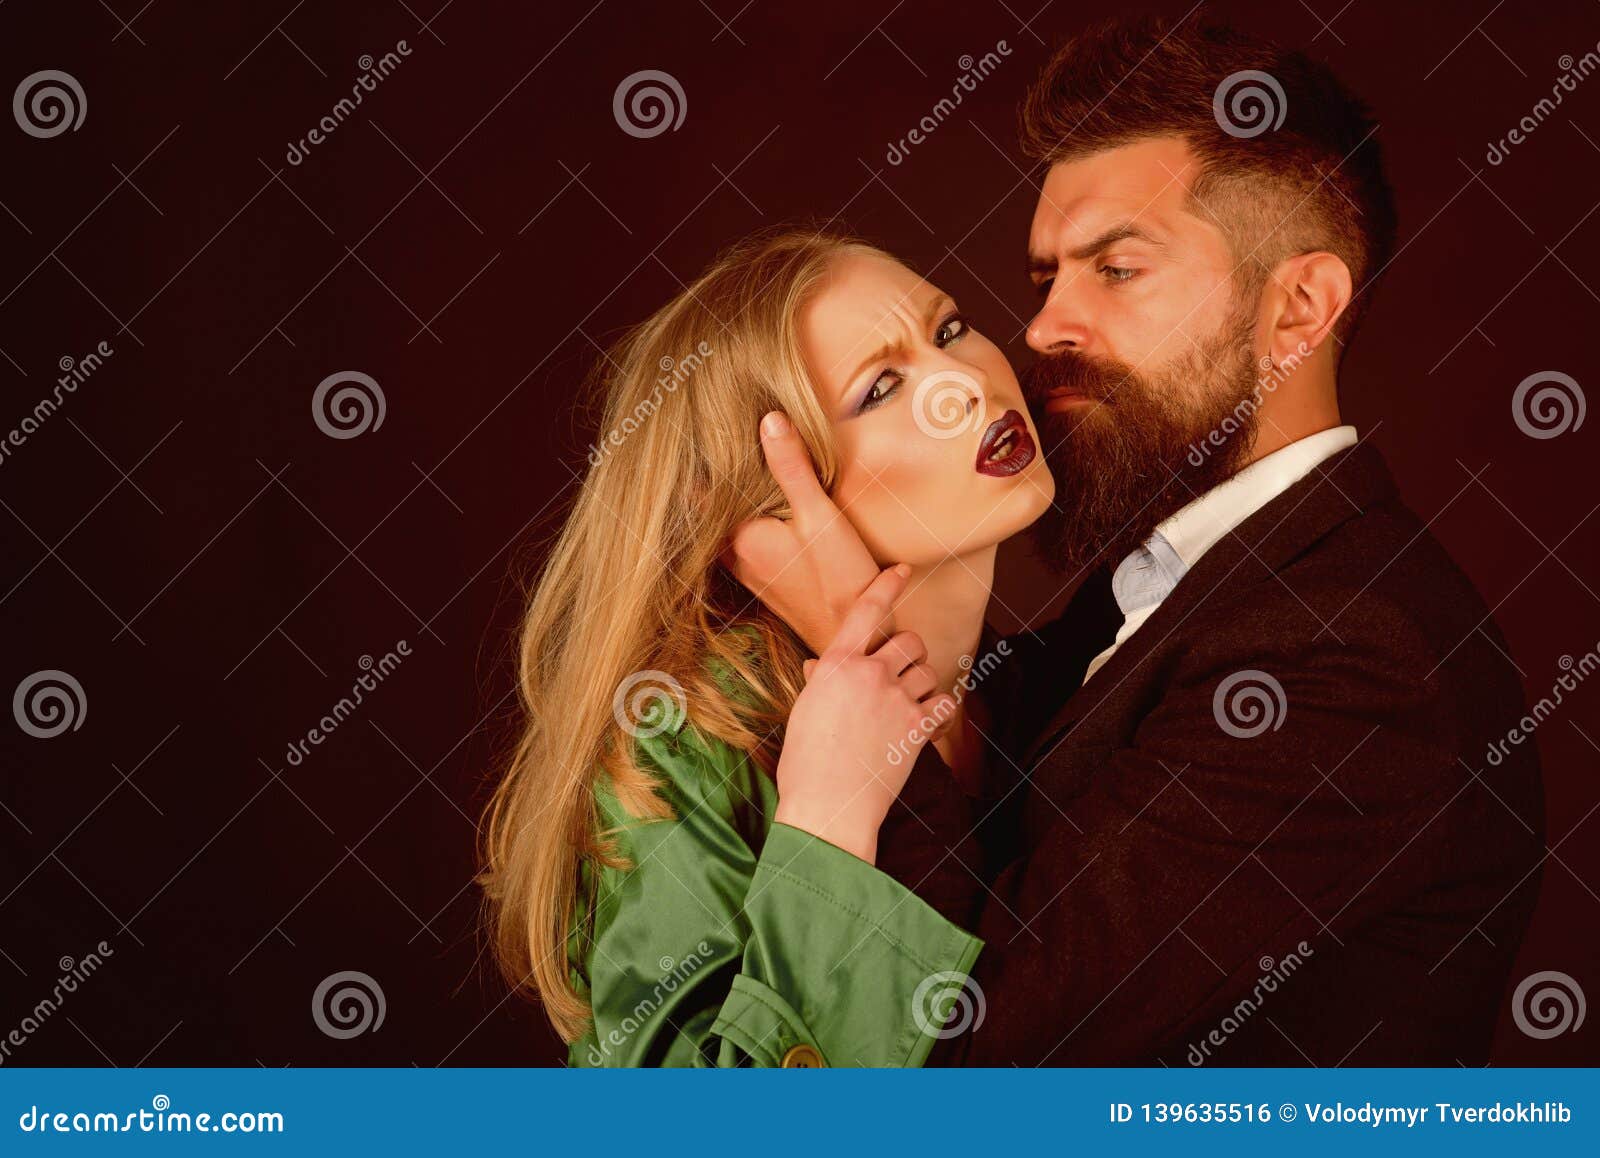 Love Is On Its Way Bearded Man Hug Woman With Long Hair They Both Love Fashion Couple In Love